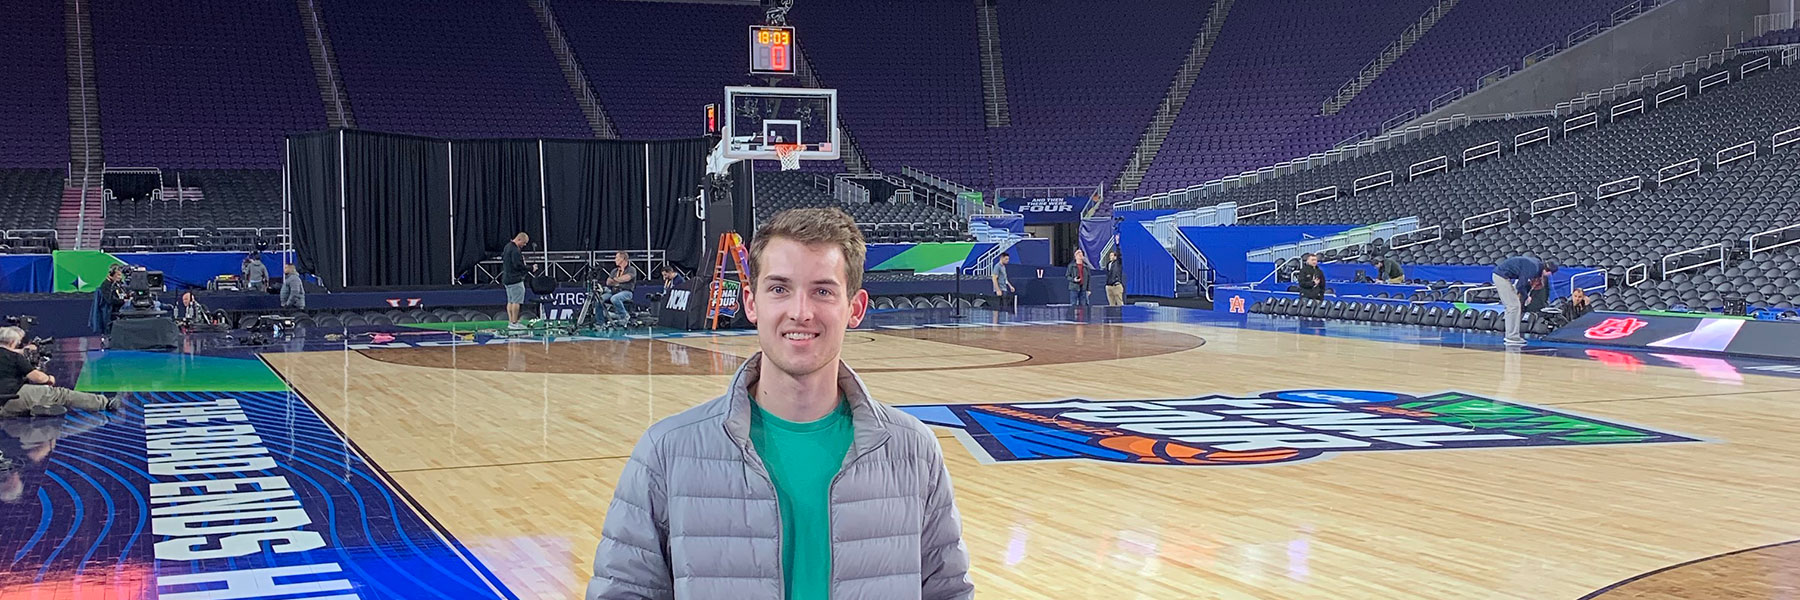 Ben Ladner on the basketball court at the 2019 men's Final Four.